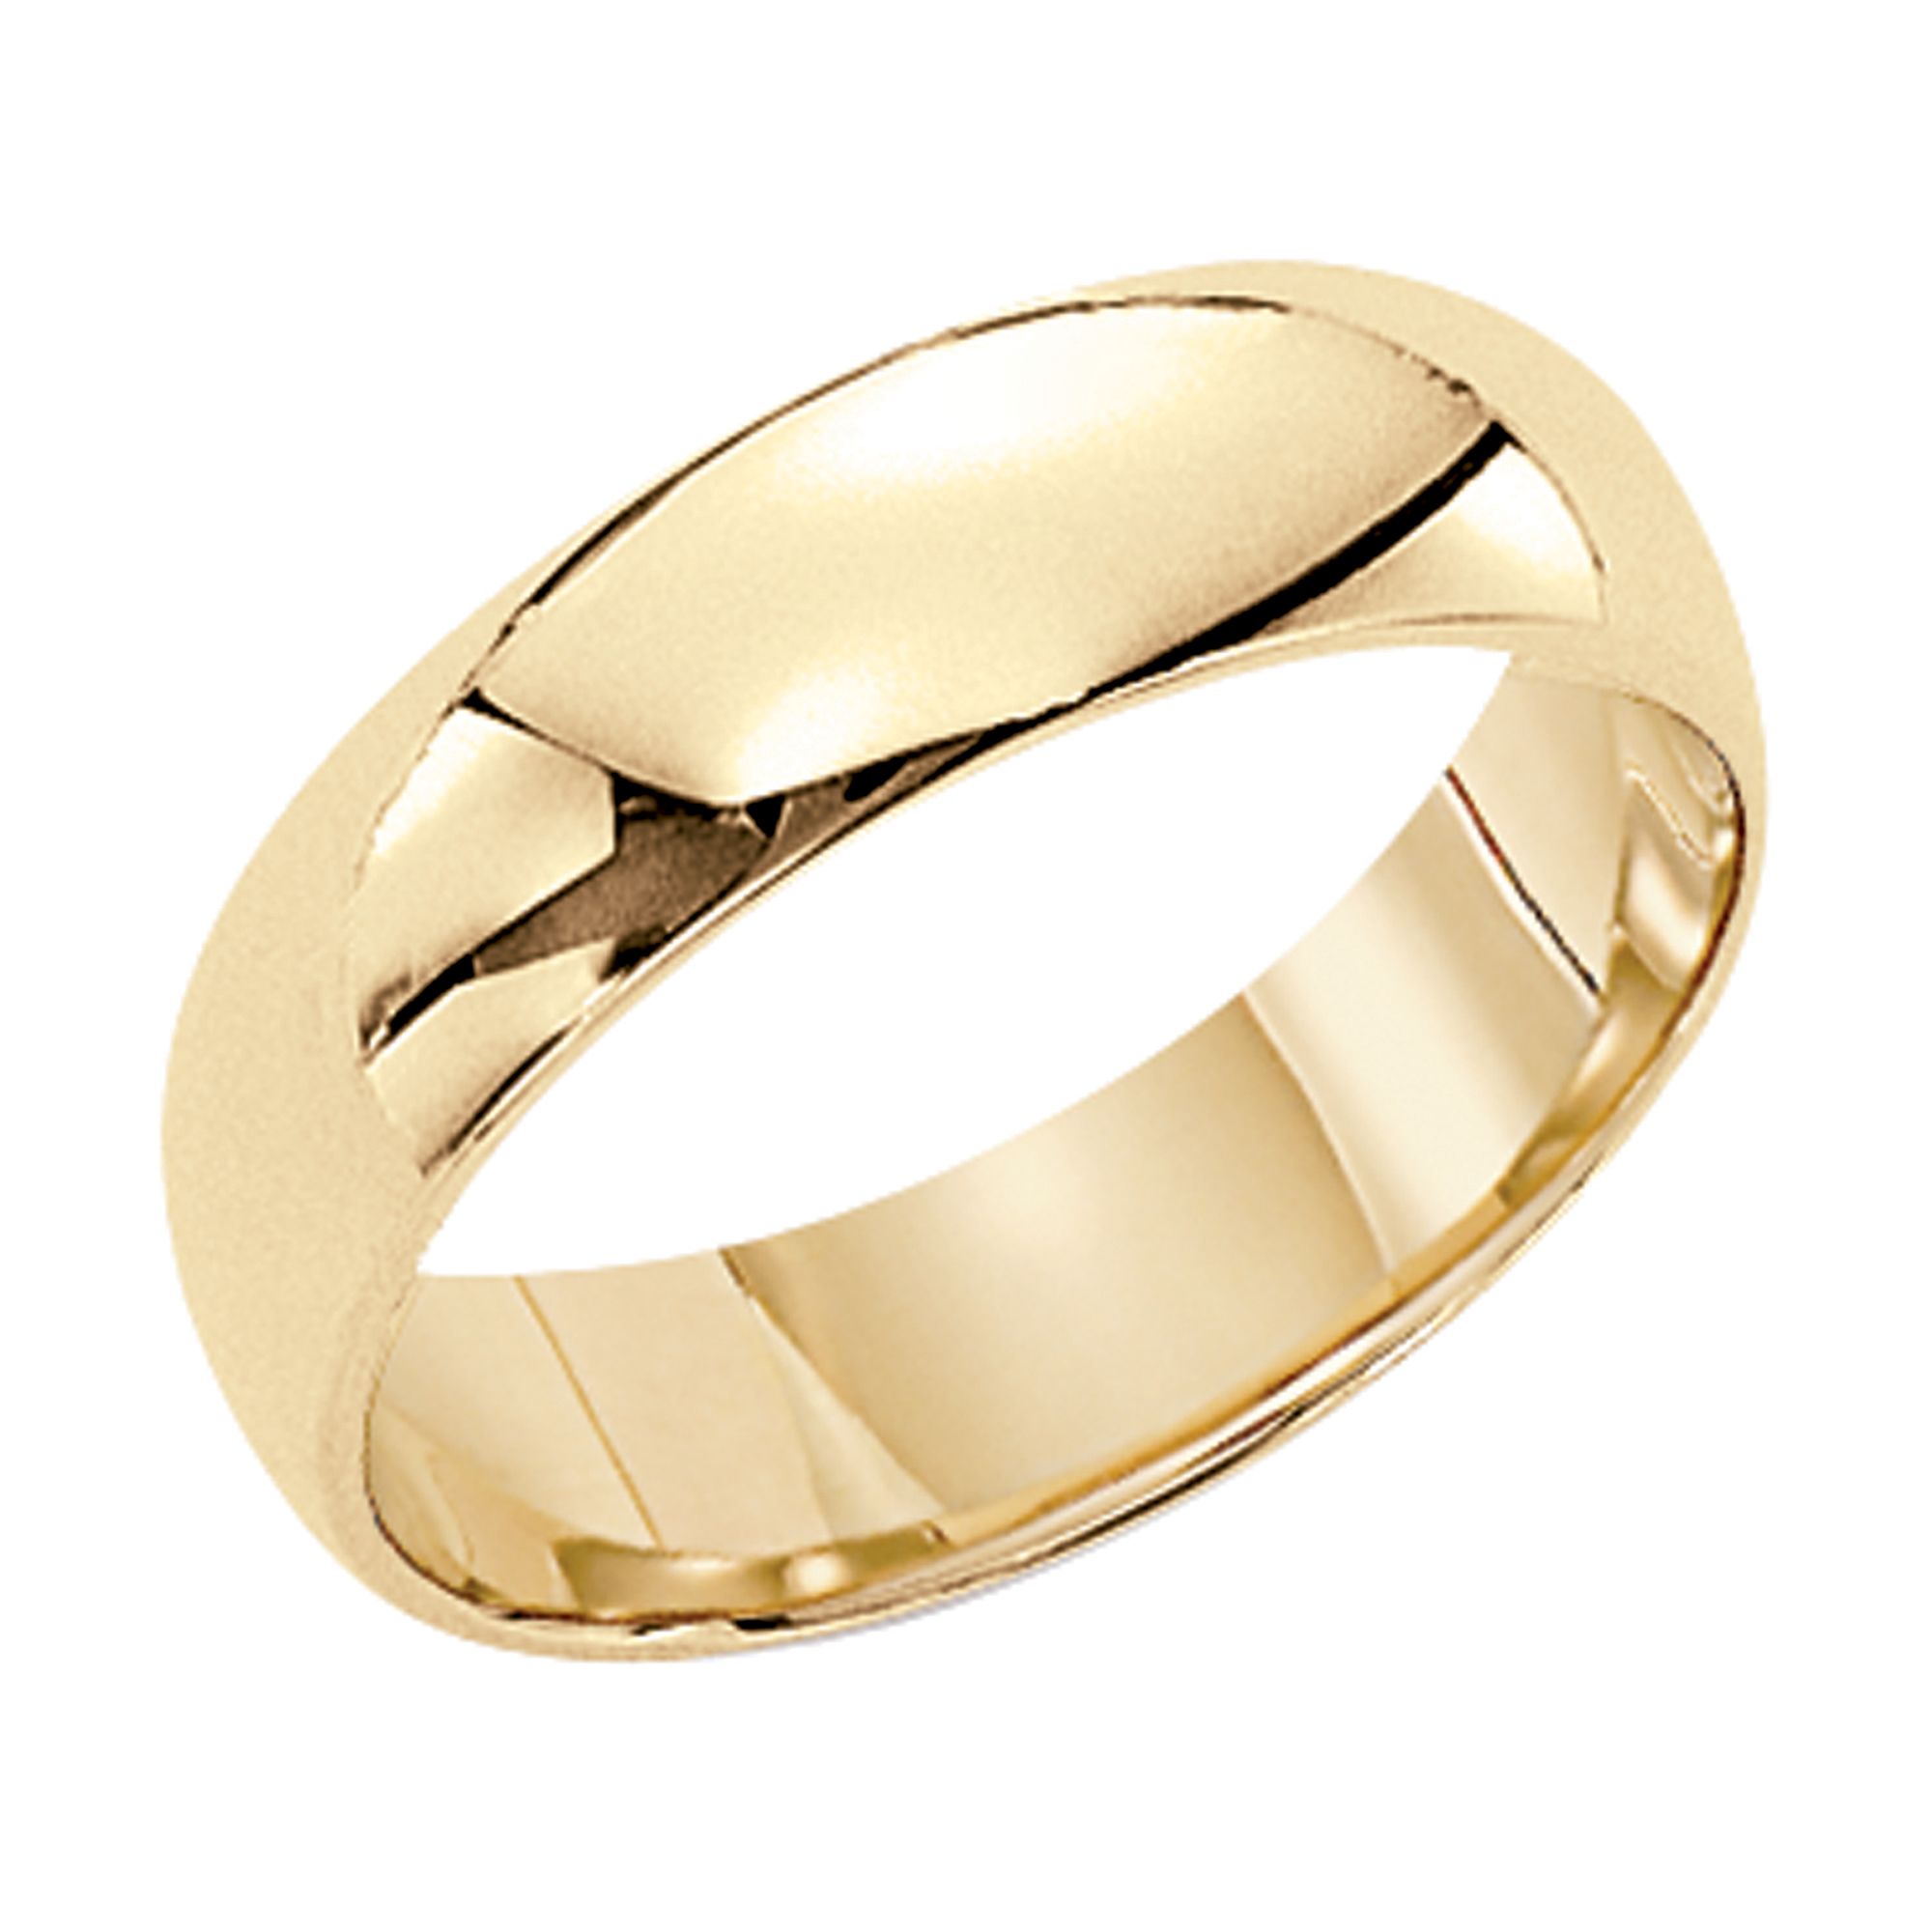 3mm Plain Wedding Band in 14K Yellow Gold Shop Your Way